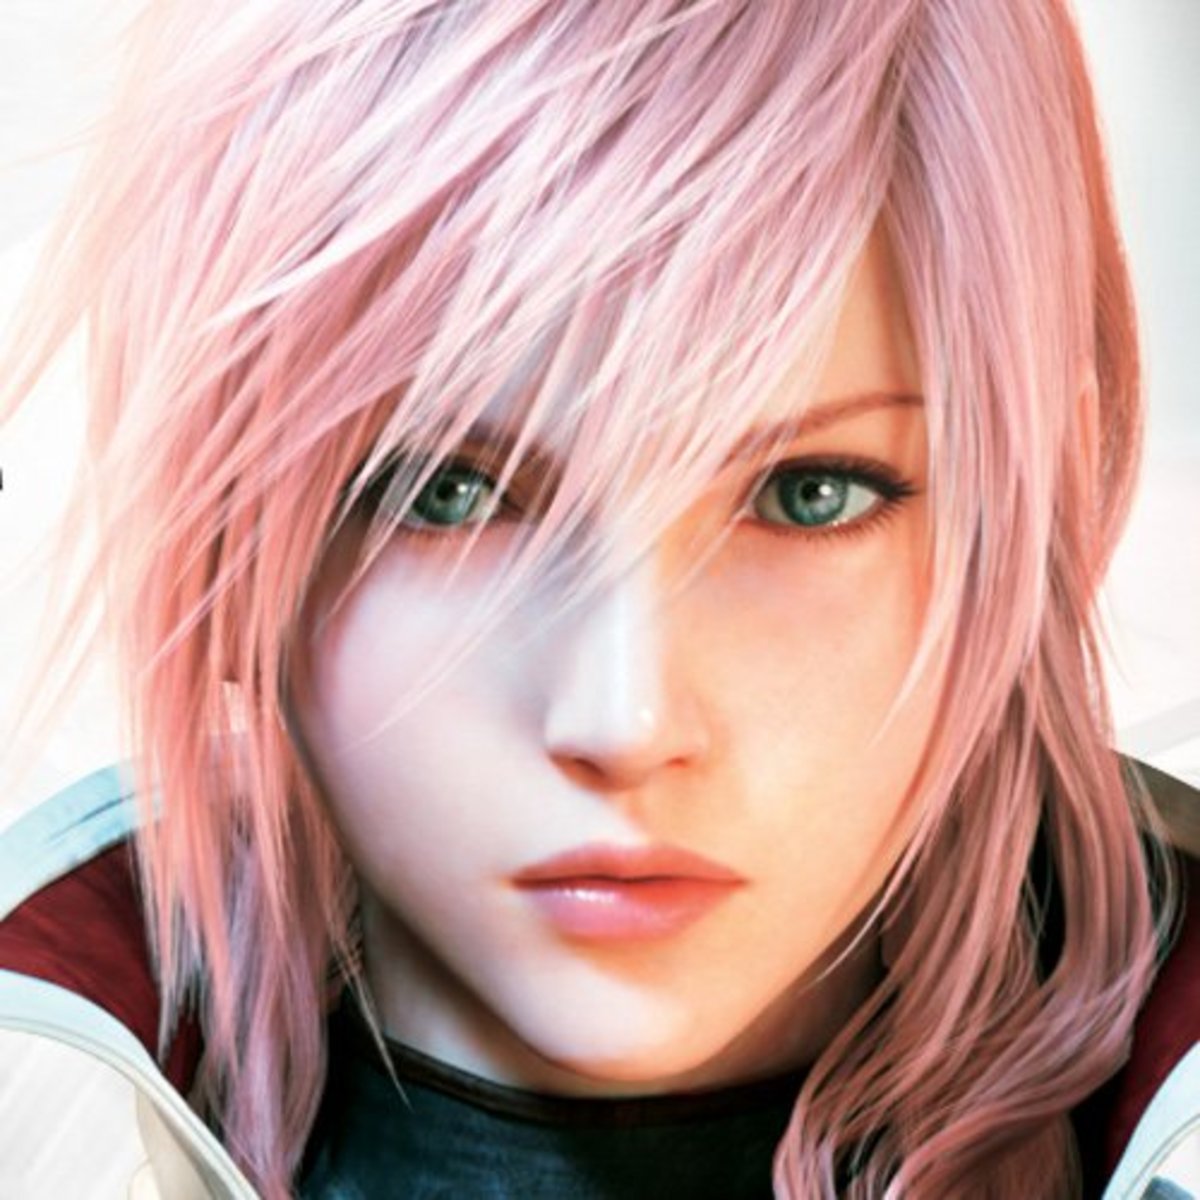 "Final Fantasy" has a long tradition of playable female characters.